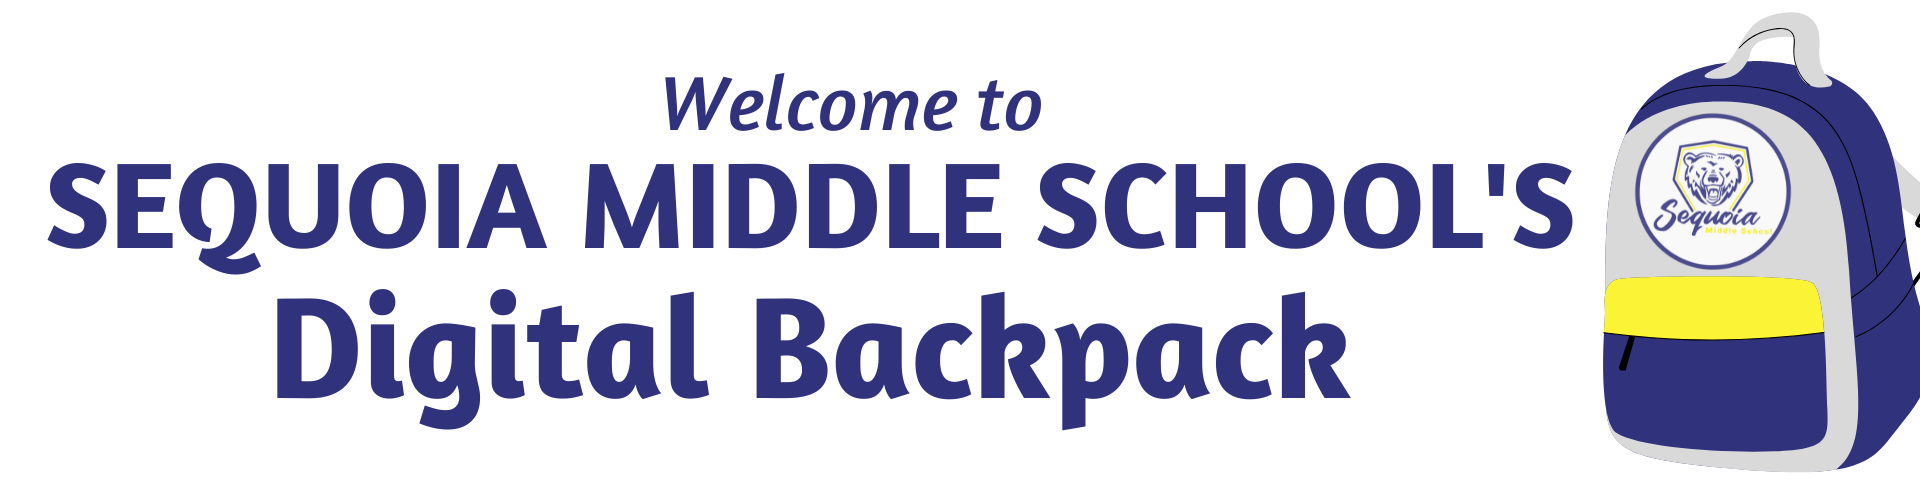 Welcome to Sequoia Middle School's Digital Backpack